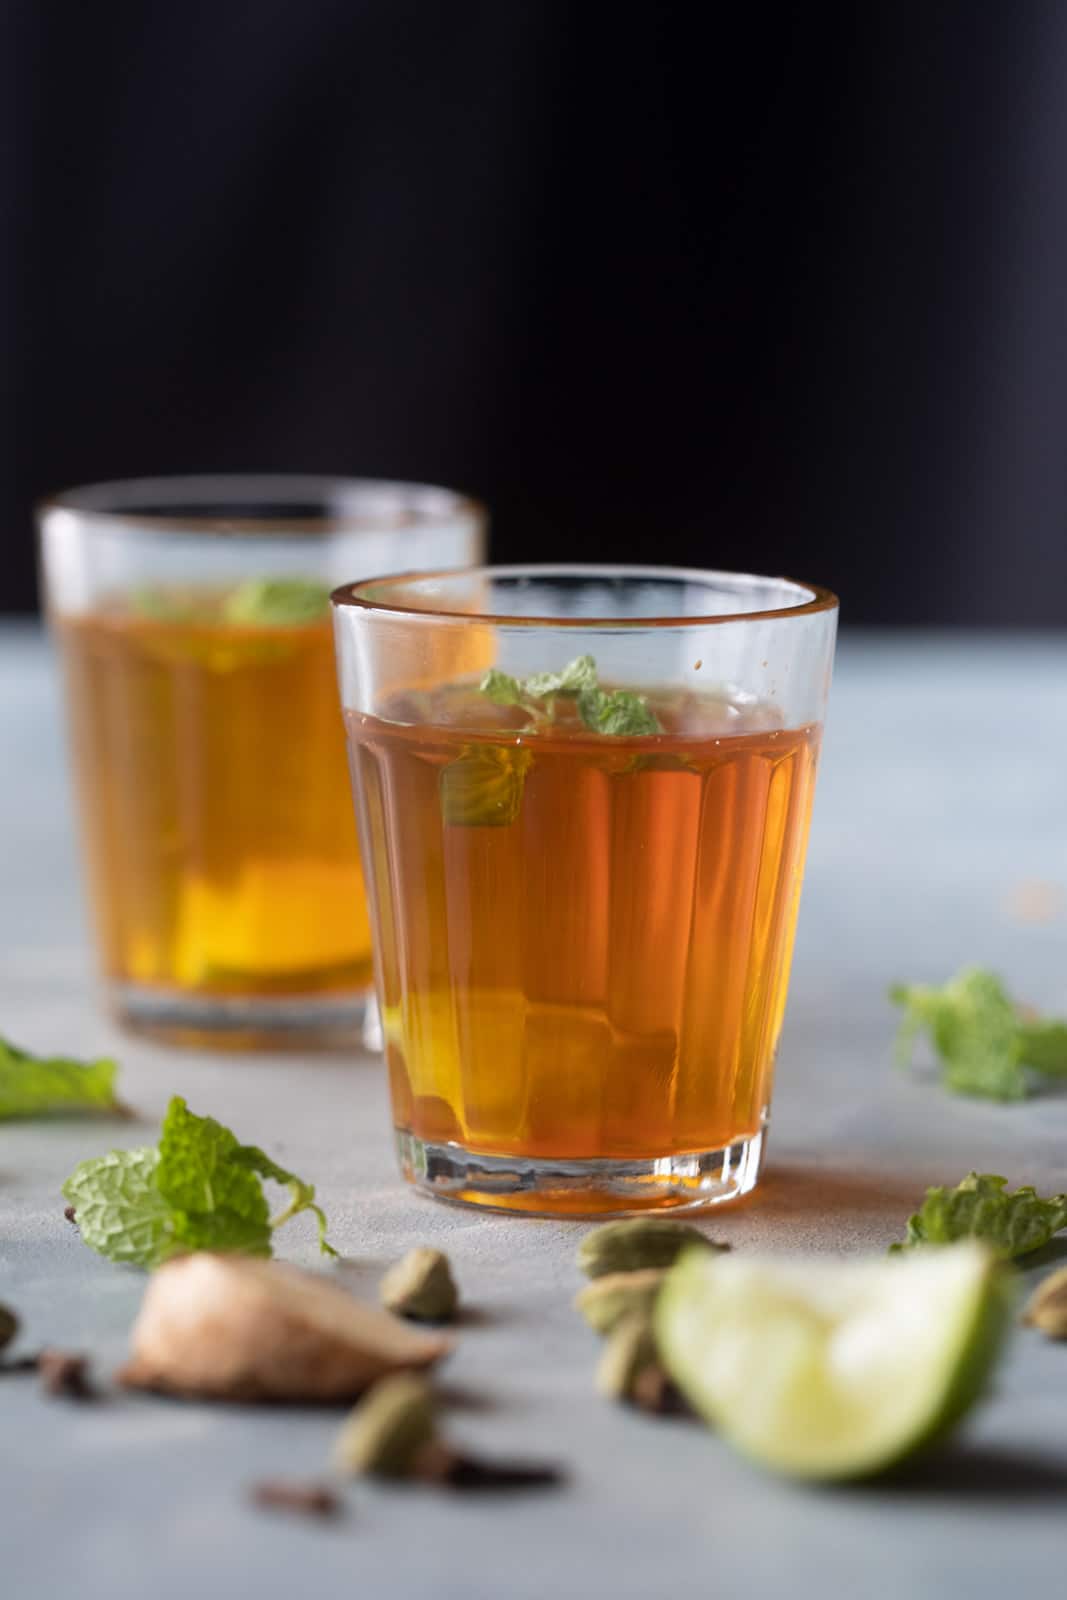 Sulaimani Chai served in small chai glasses with mint and lemon